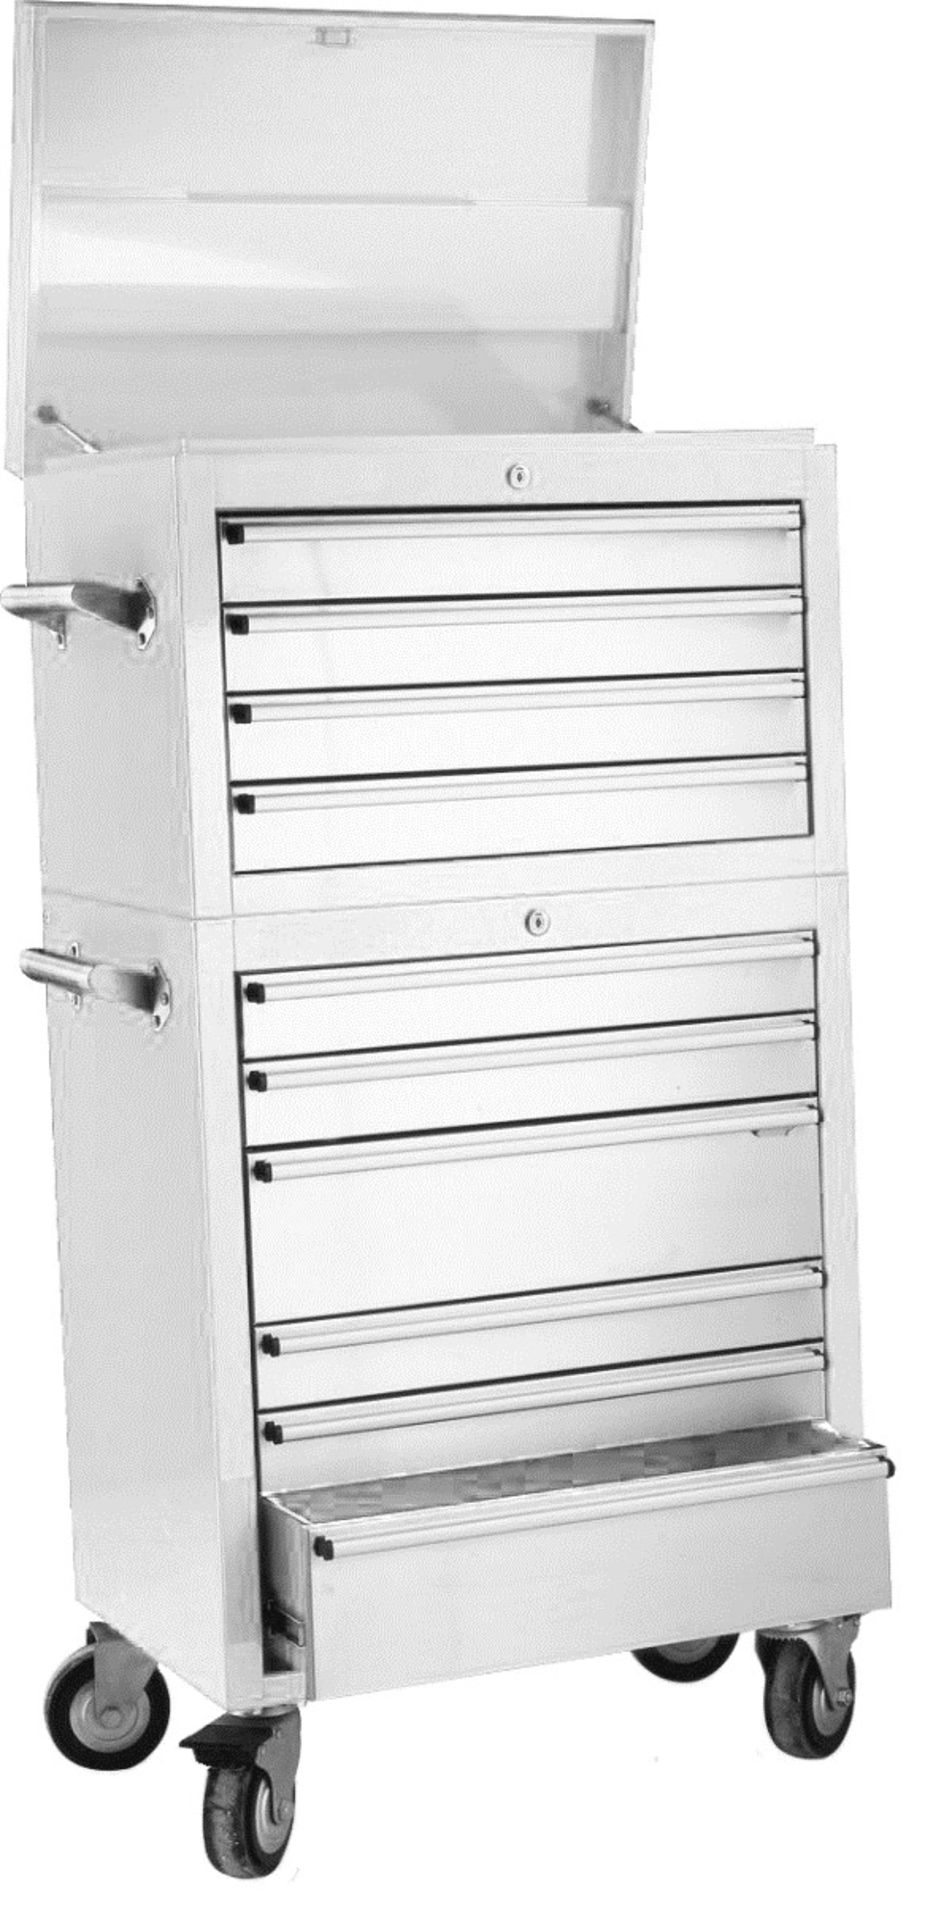 26 inch 10 draw stainless steel storage unit 661mm W x 1280mm H 460mm D NEW and BOXED Includes: